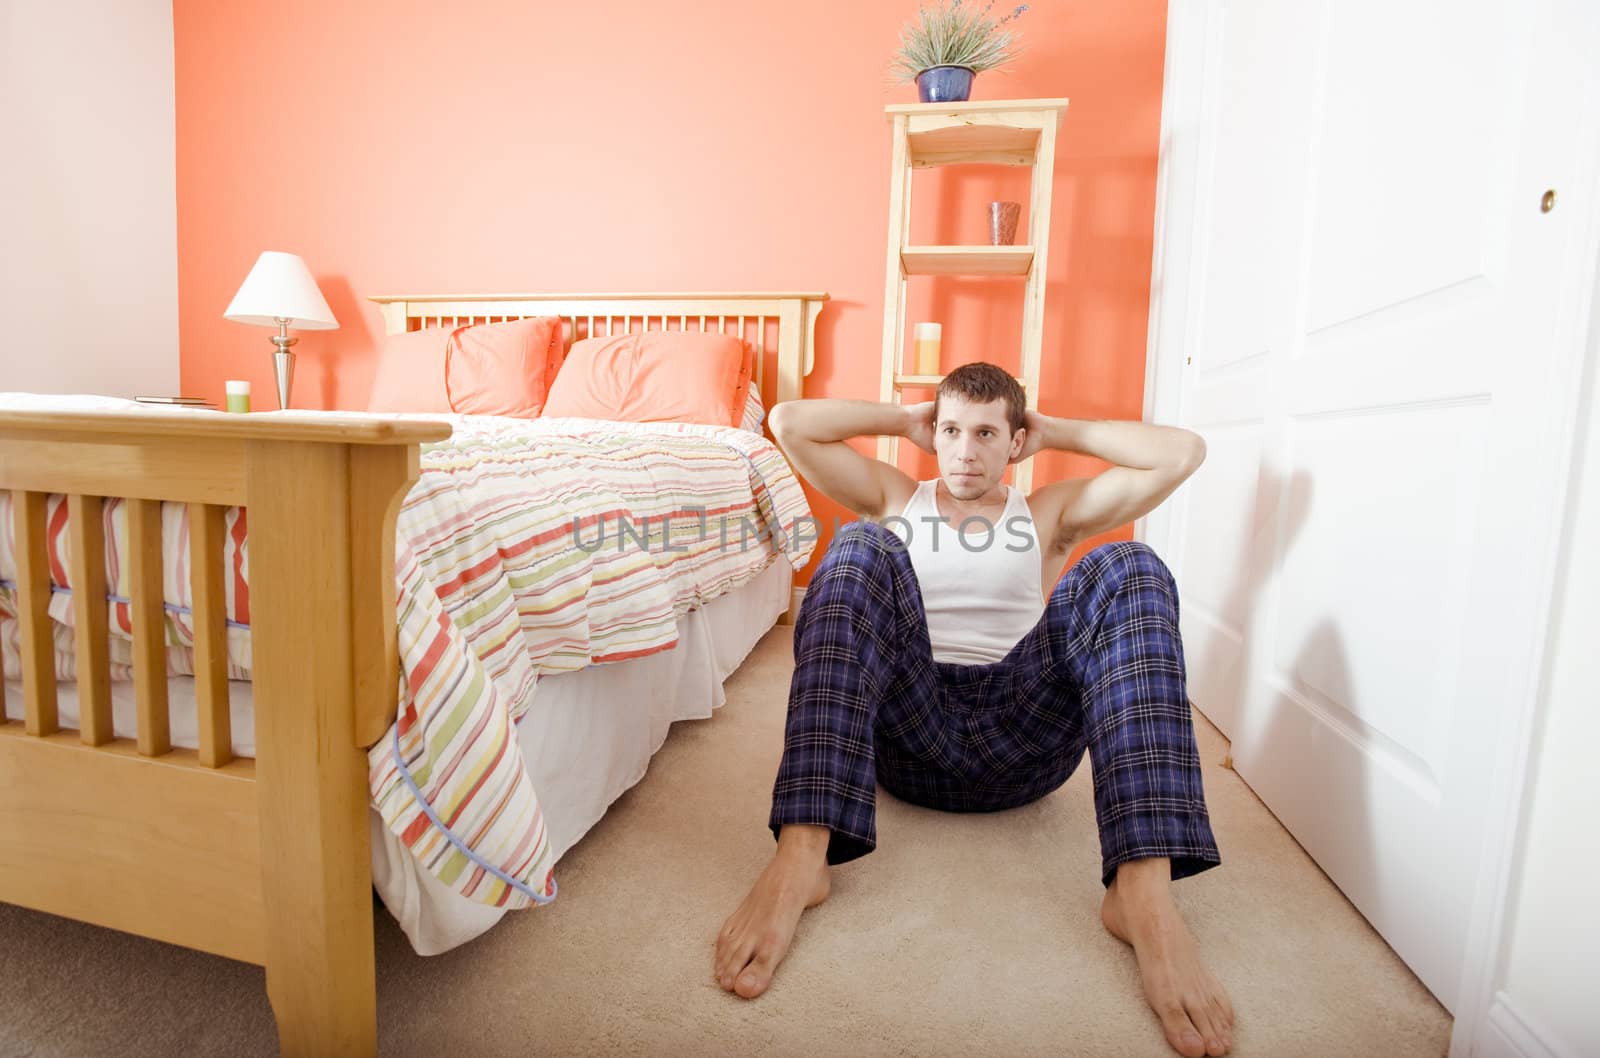 View of man facing the camera and doing sit-ups next to his bed. Horizontal format.